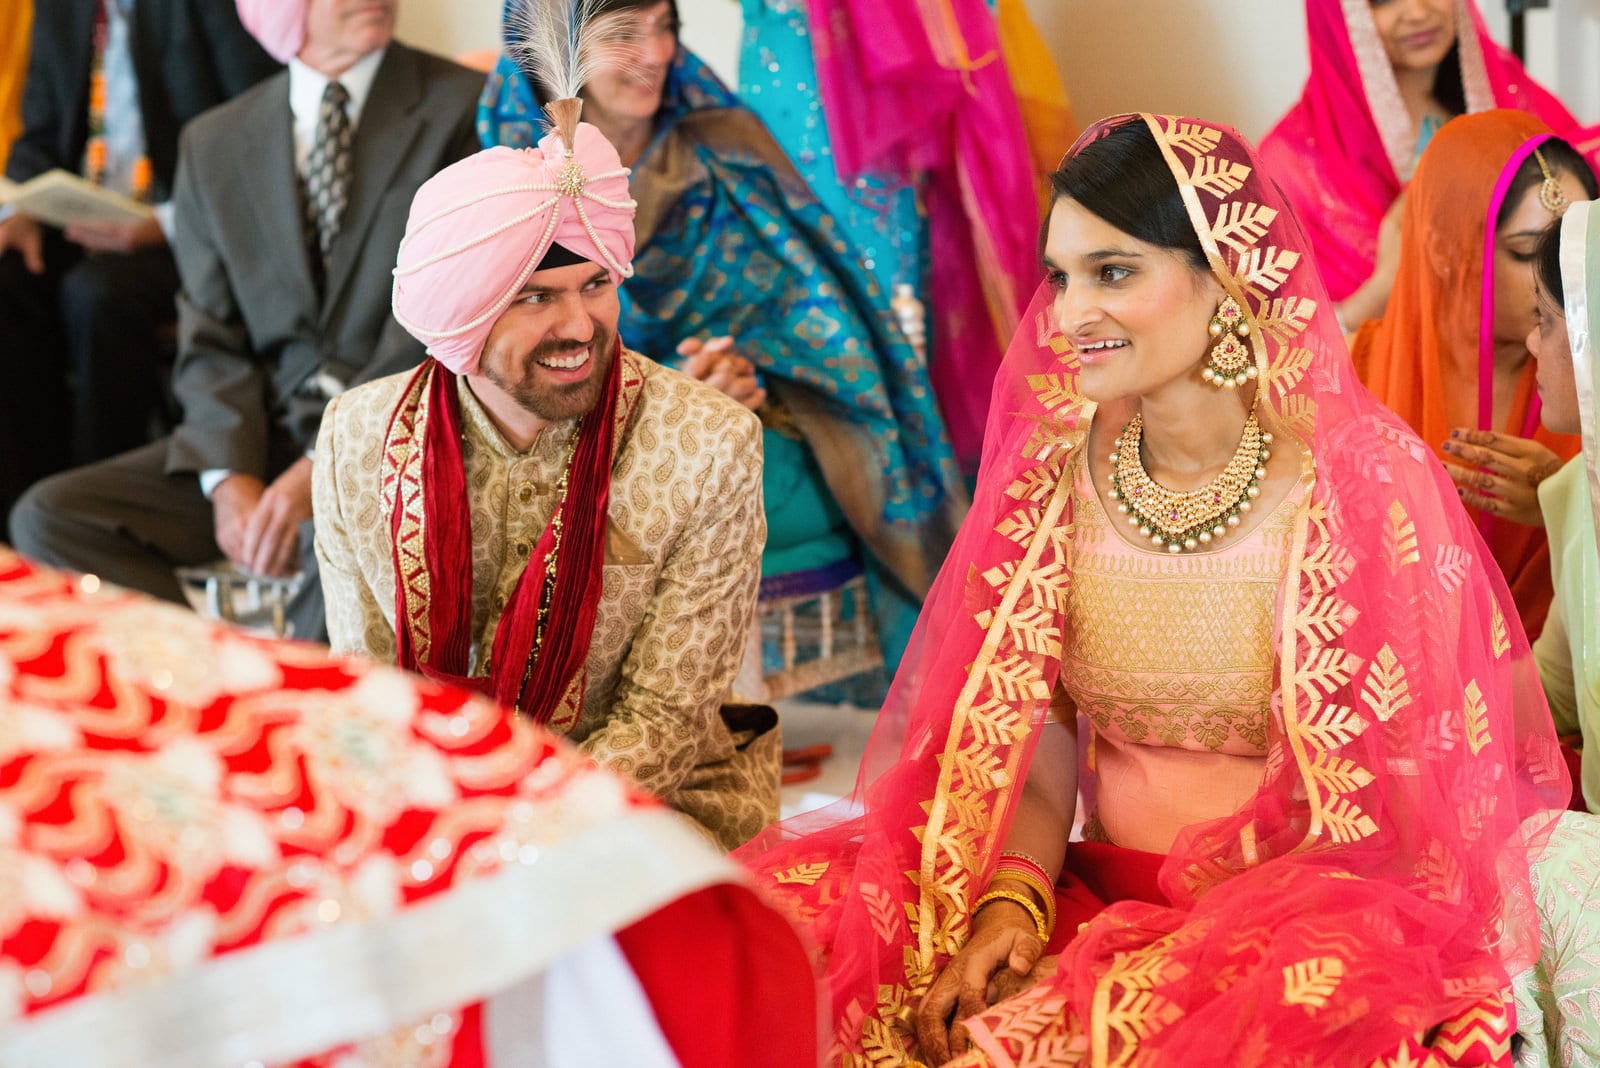 A groom in a pink turban smiles at his bride who is wearing a gold and chartreuse sari during their Sikh wedding at their Renaissance Phipps South Asian Wedding.